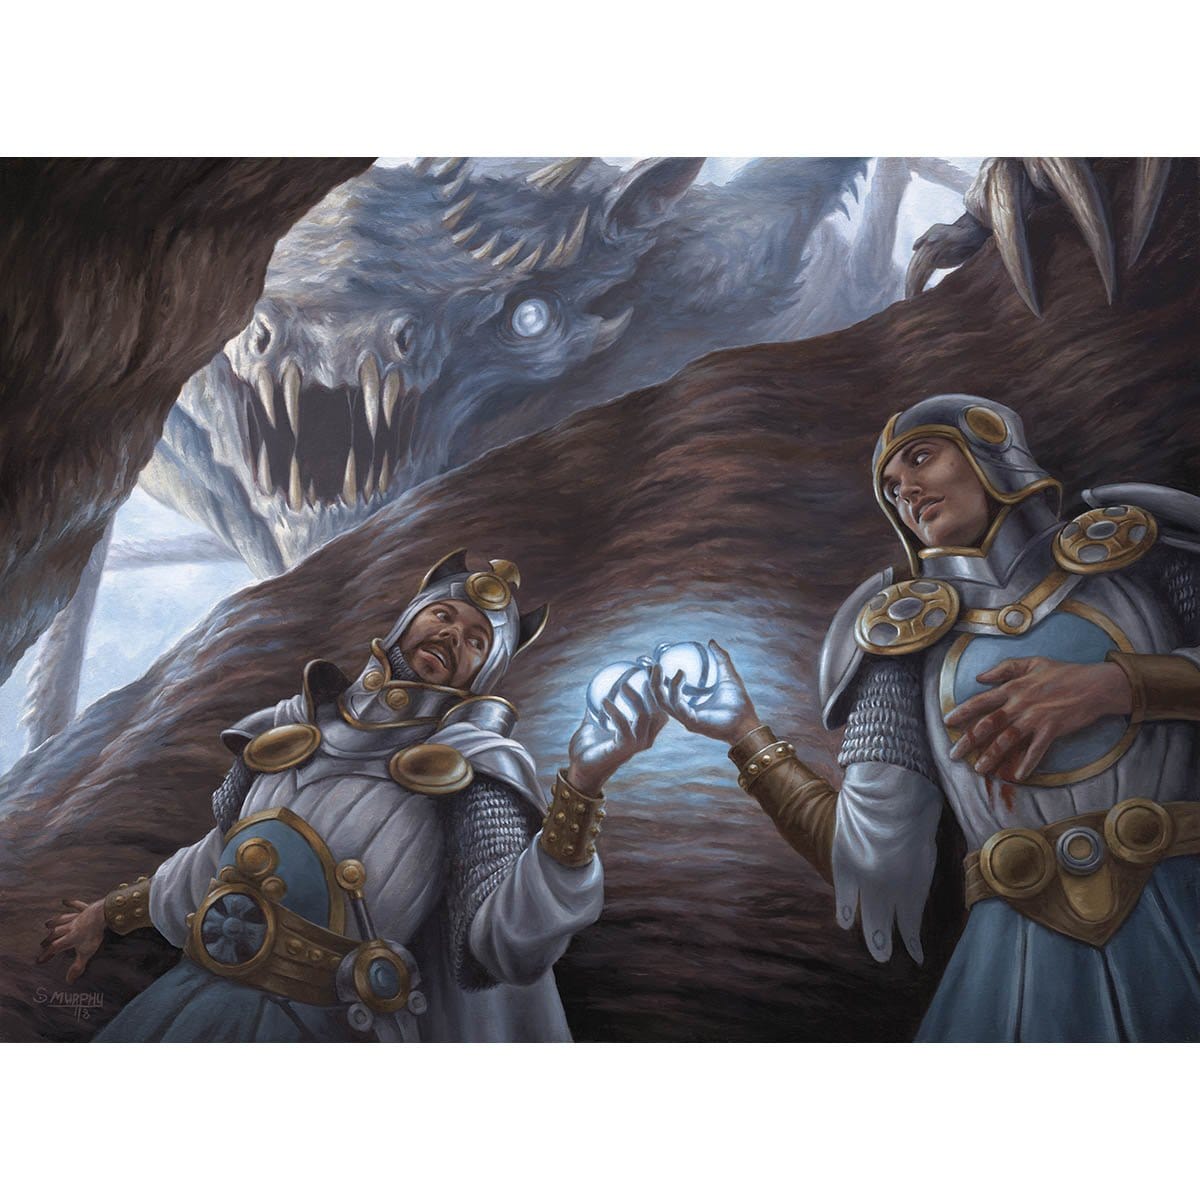 Fortifying Provisions Print - Print - Original Magic Art - Accessories for Magic the Gathering and other card games